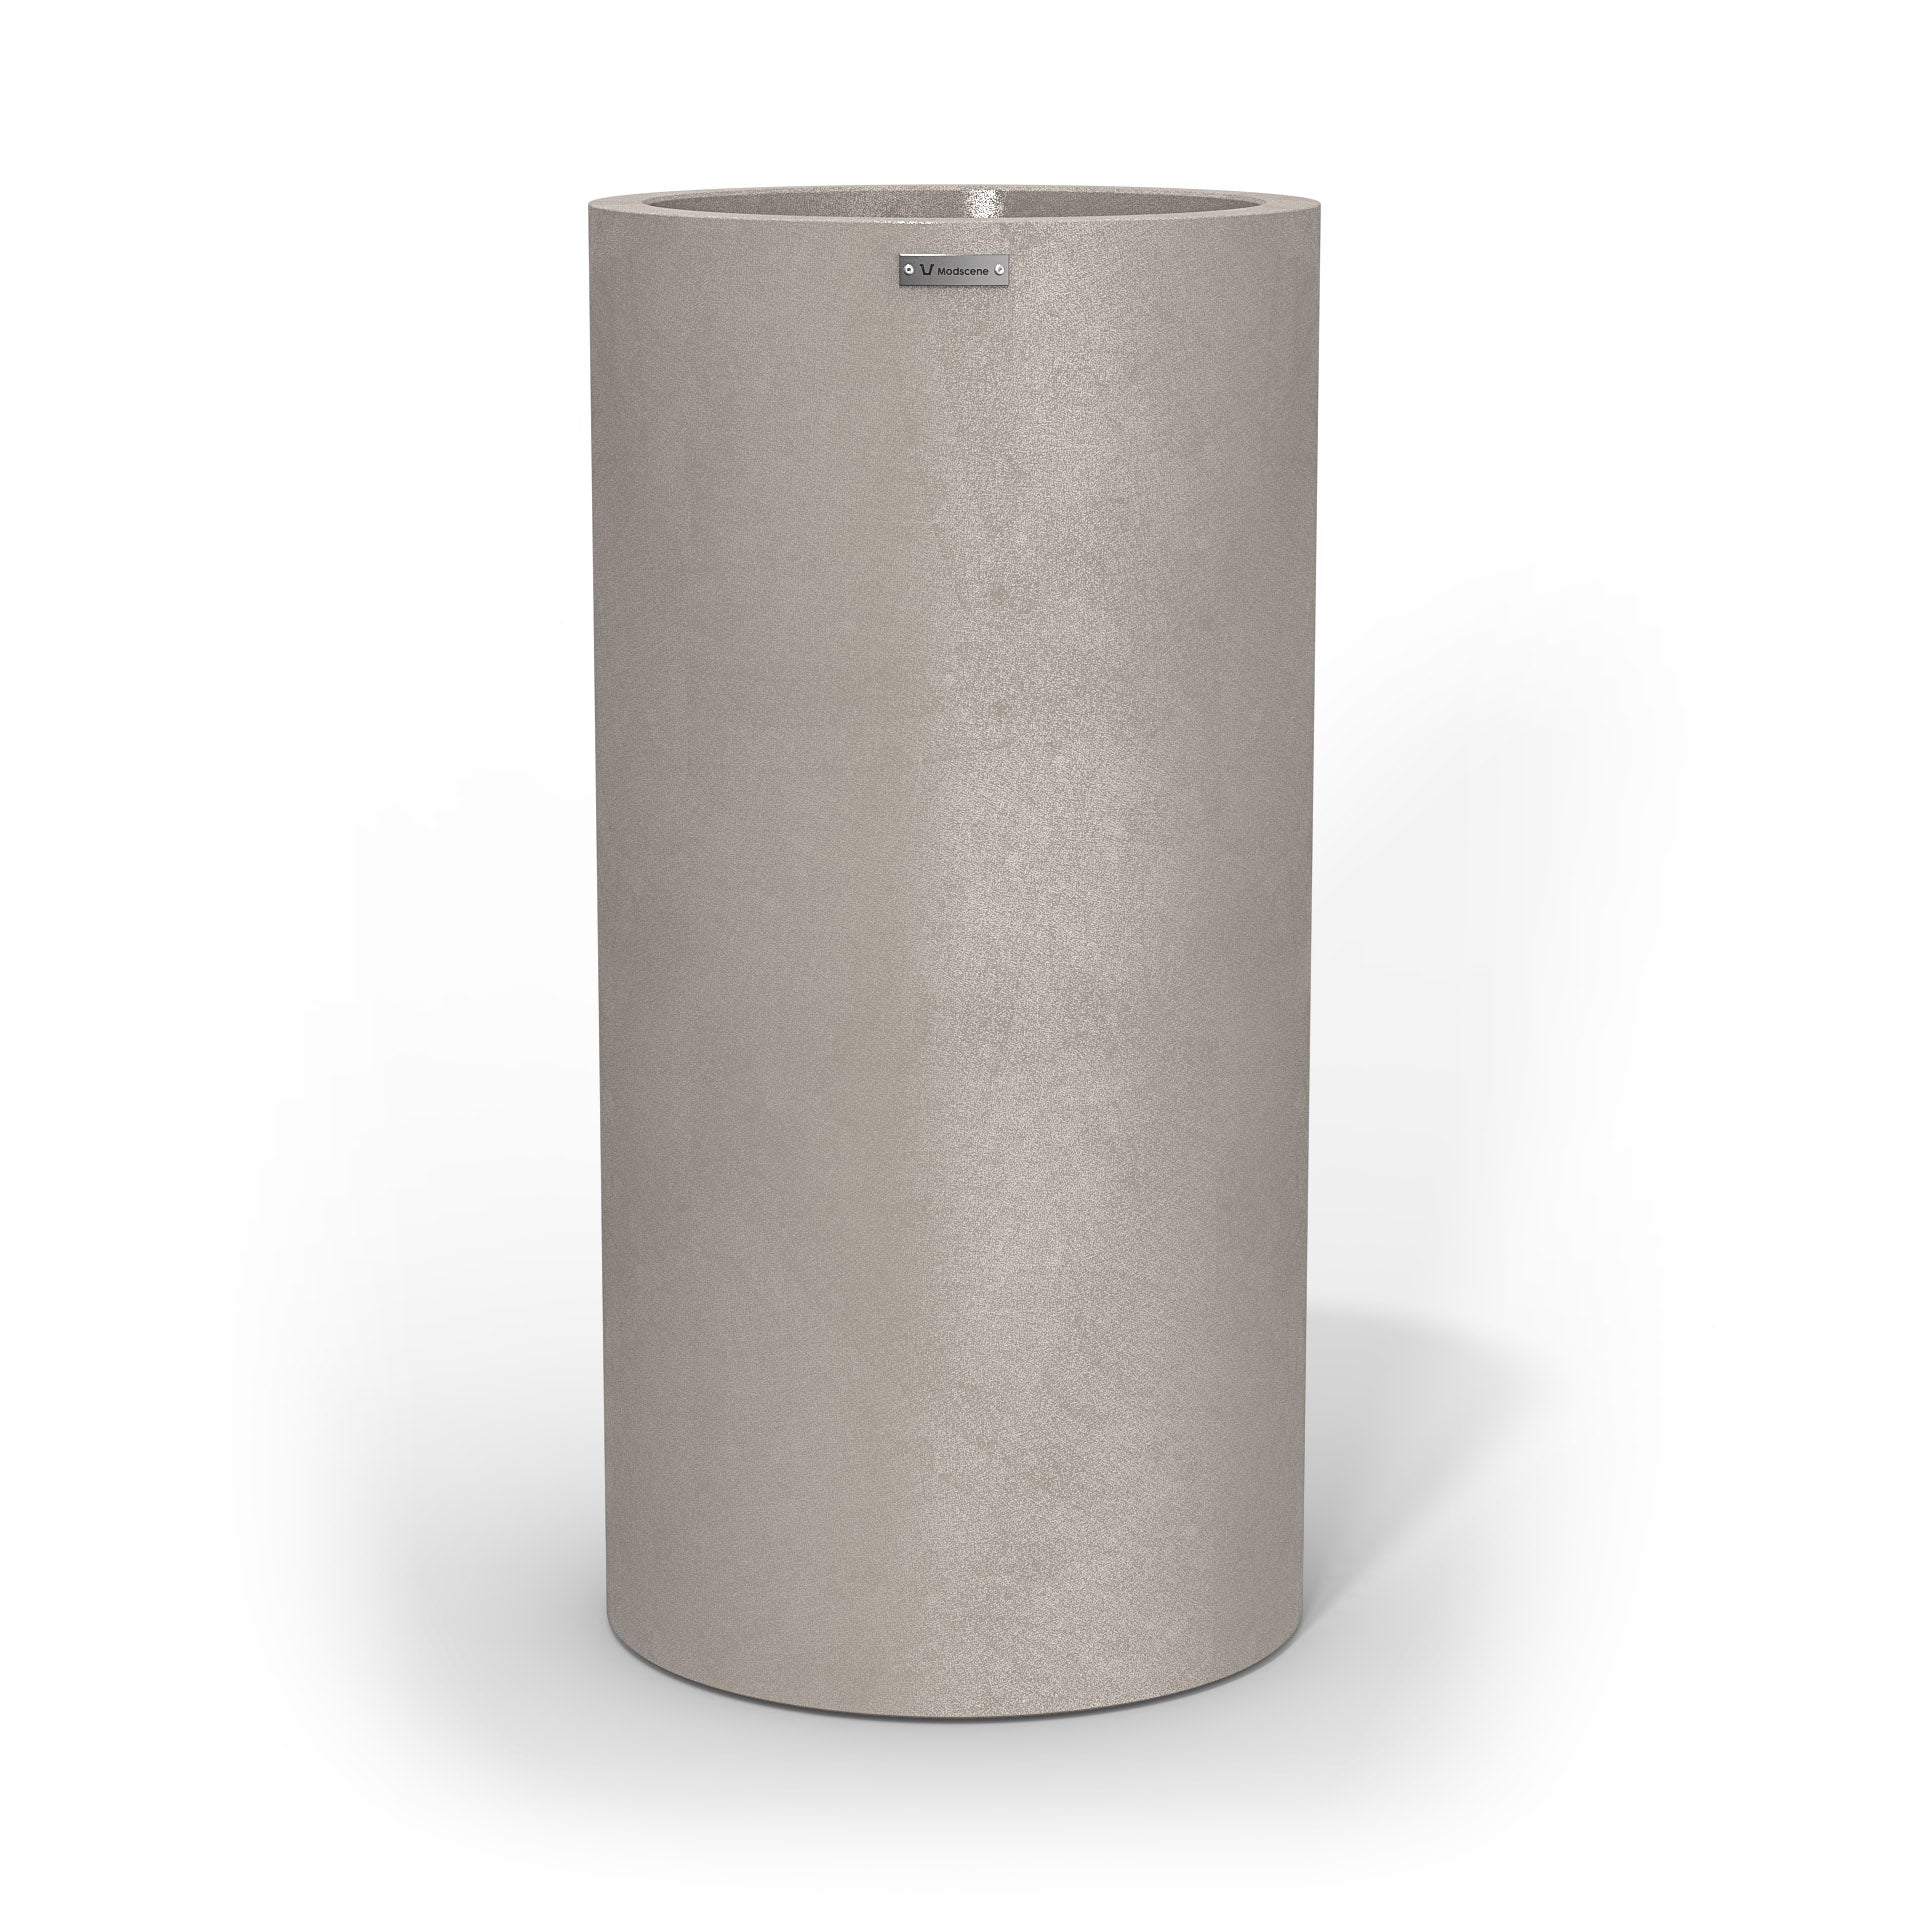 A tall cylinder planter pot in a sand stone colour with a concrete look finish.